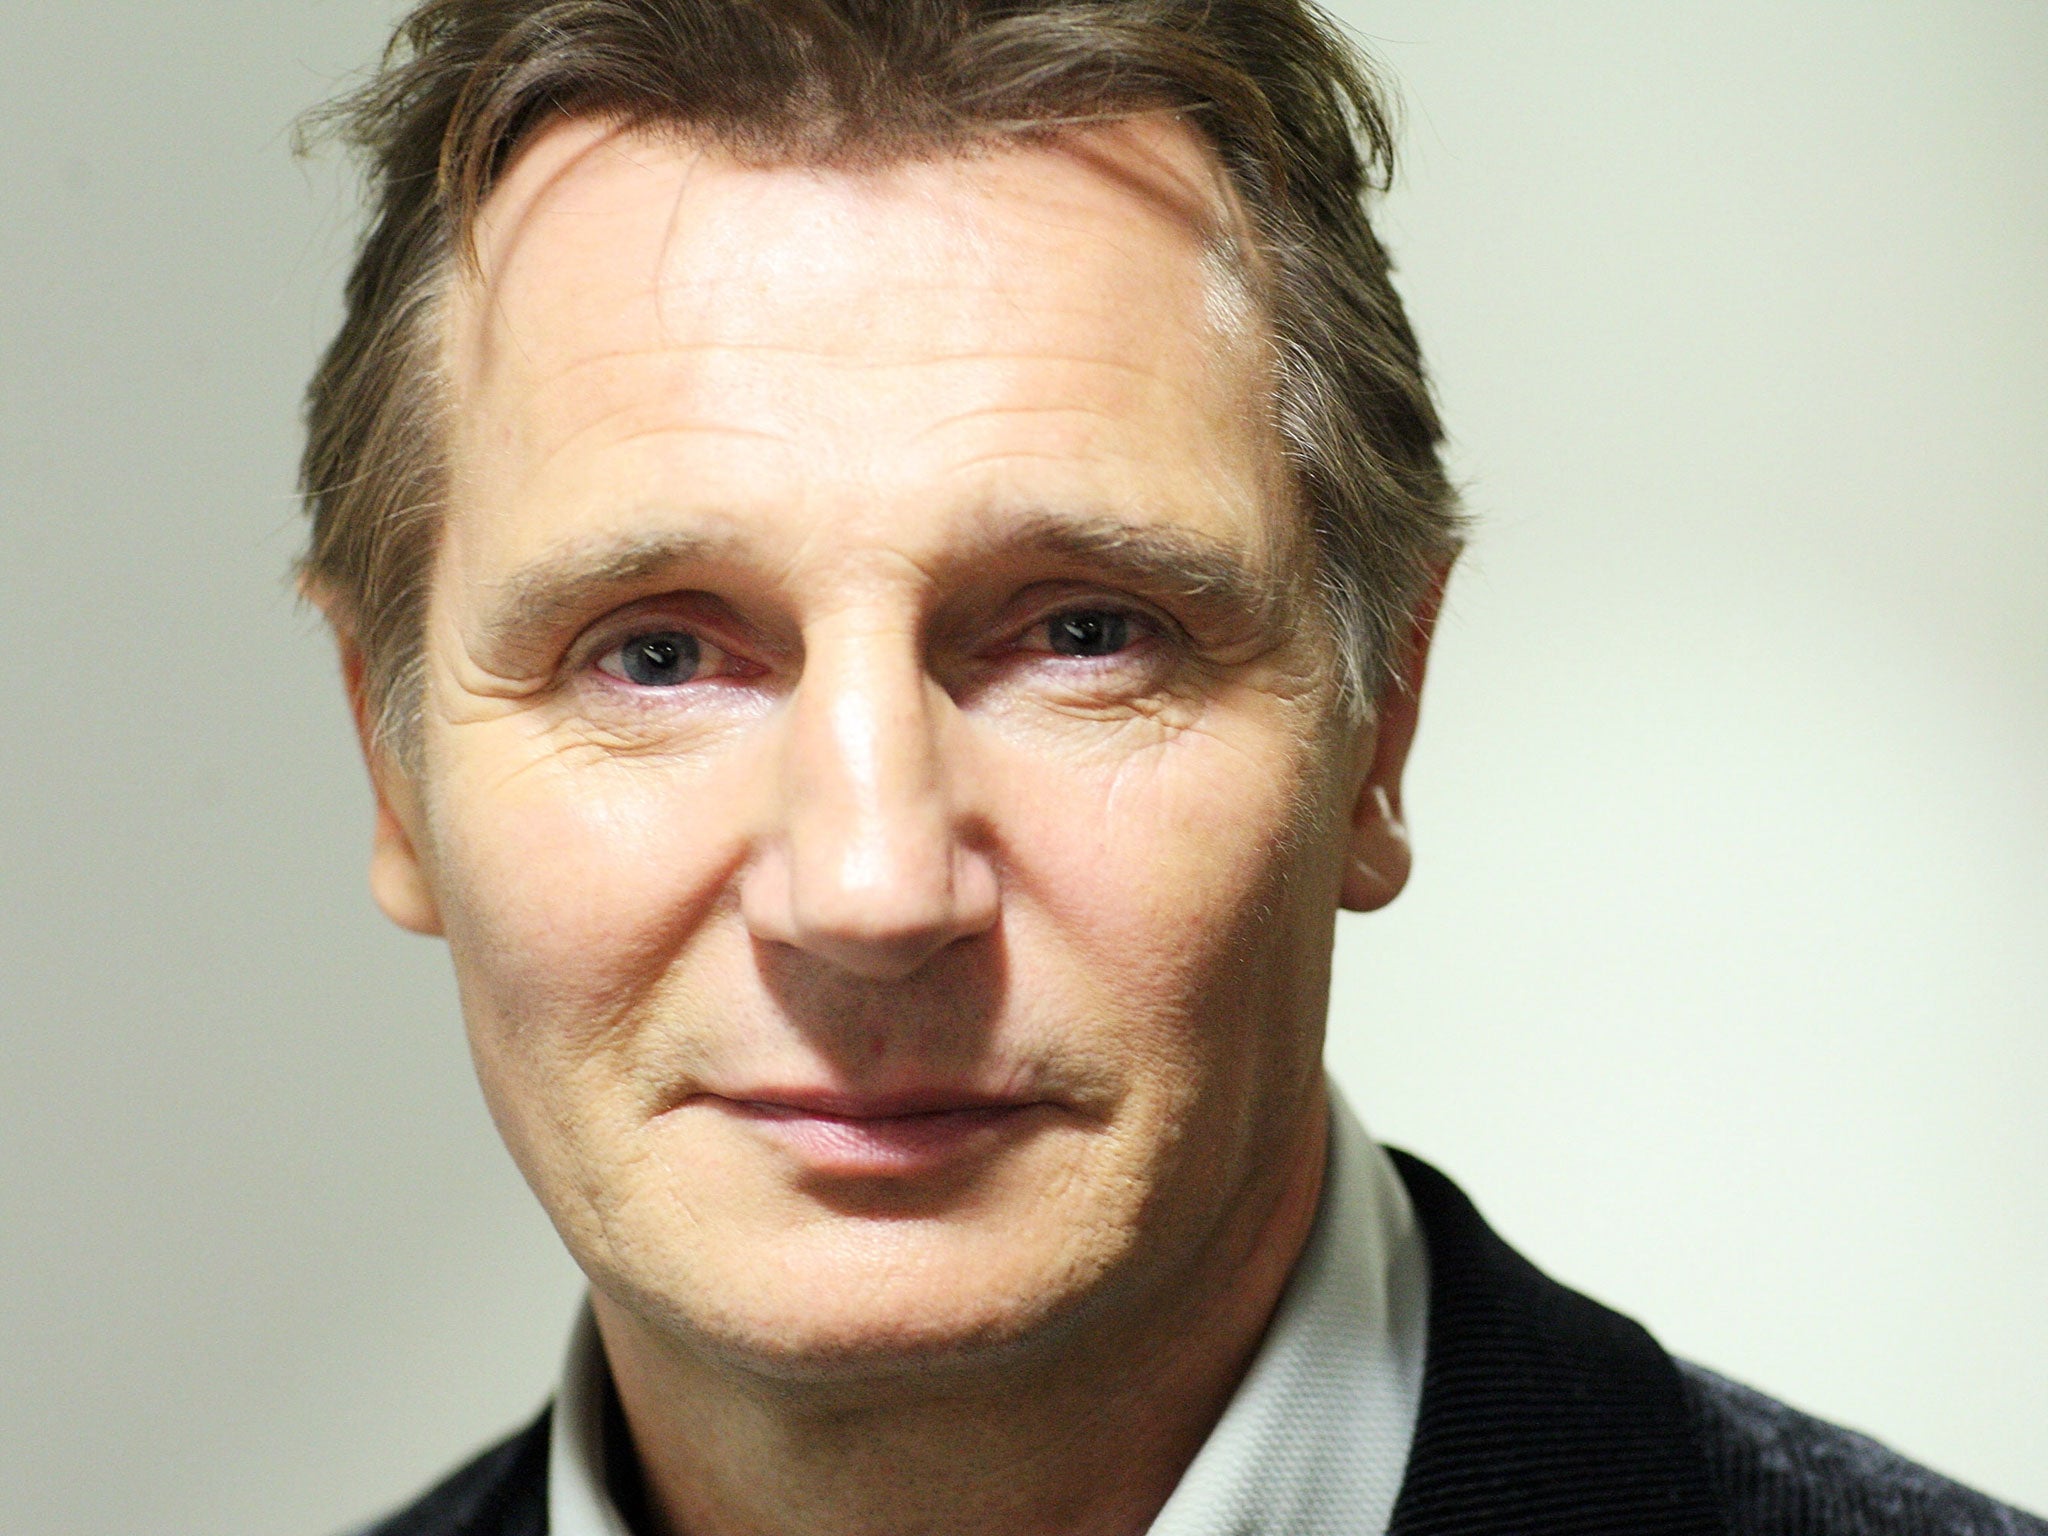 Liam Neeson will star in Seth MacFarlane's highly-anticipated Ted 2